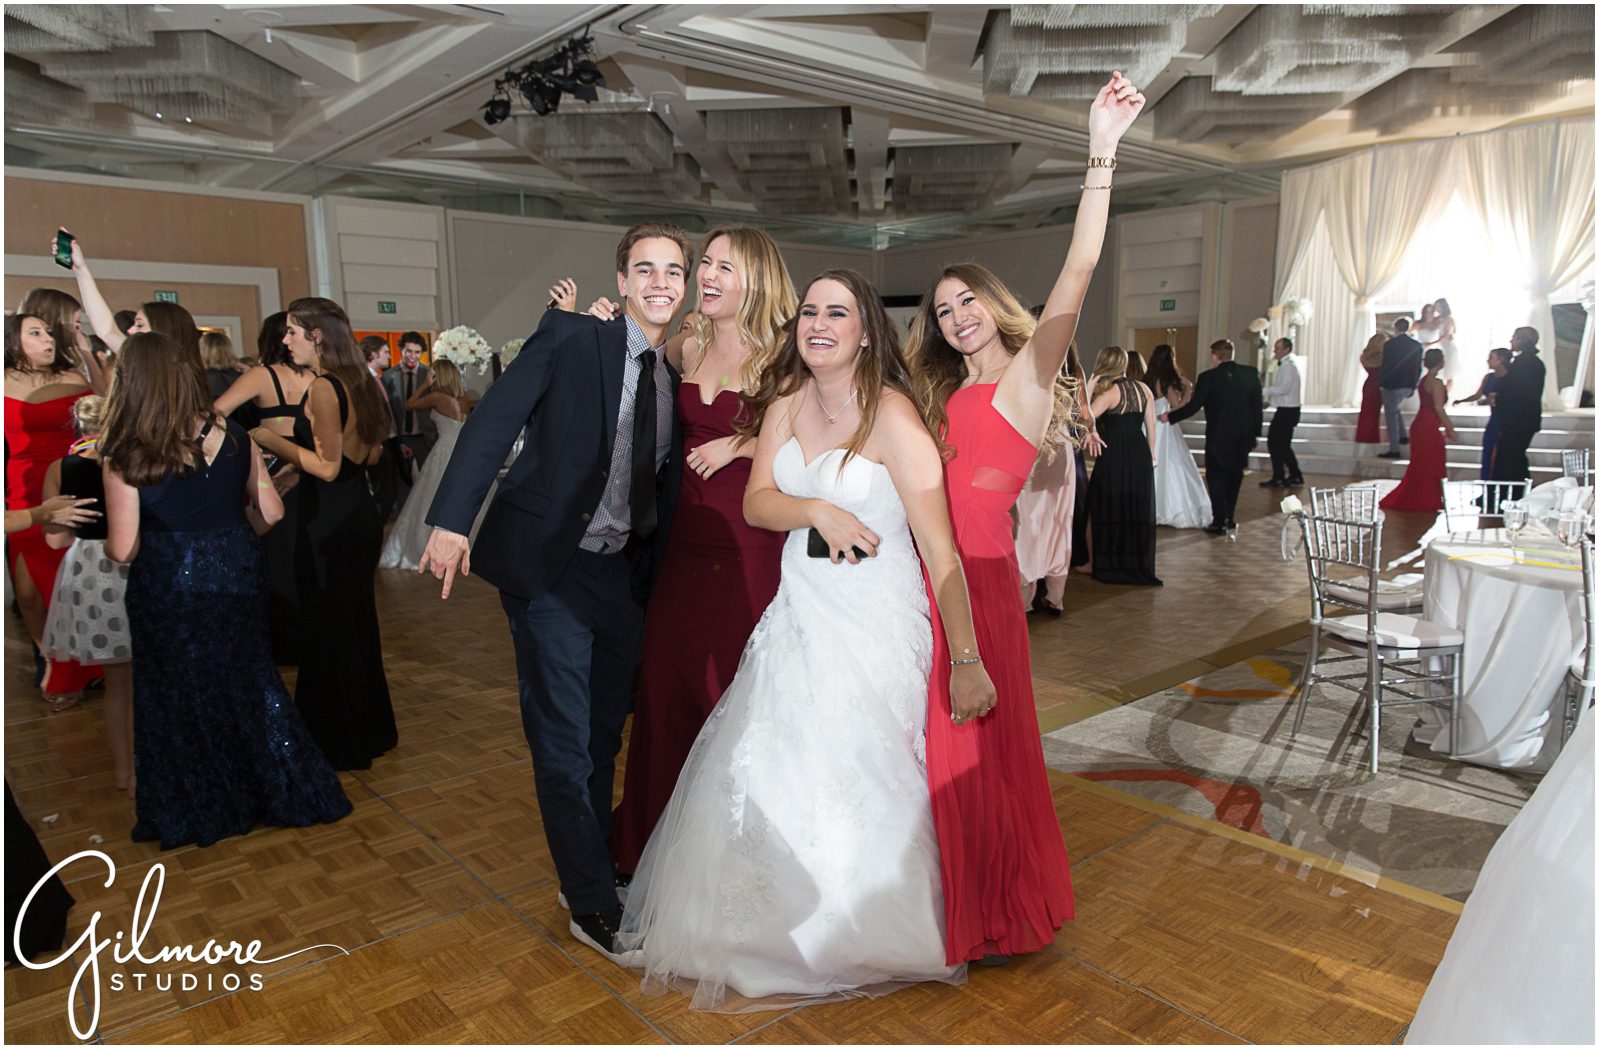 Dancing at the debutante ball, Hotel Irvine event photographer